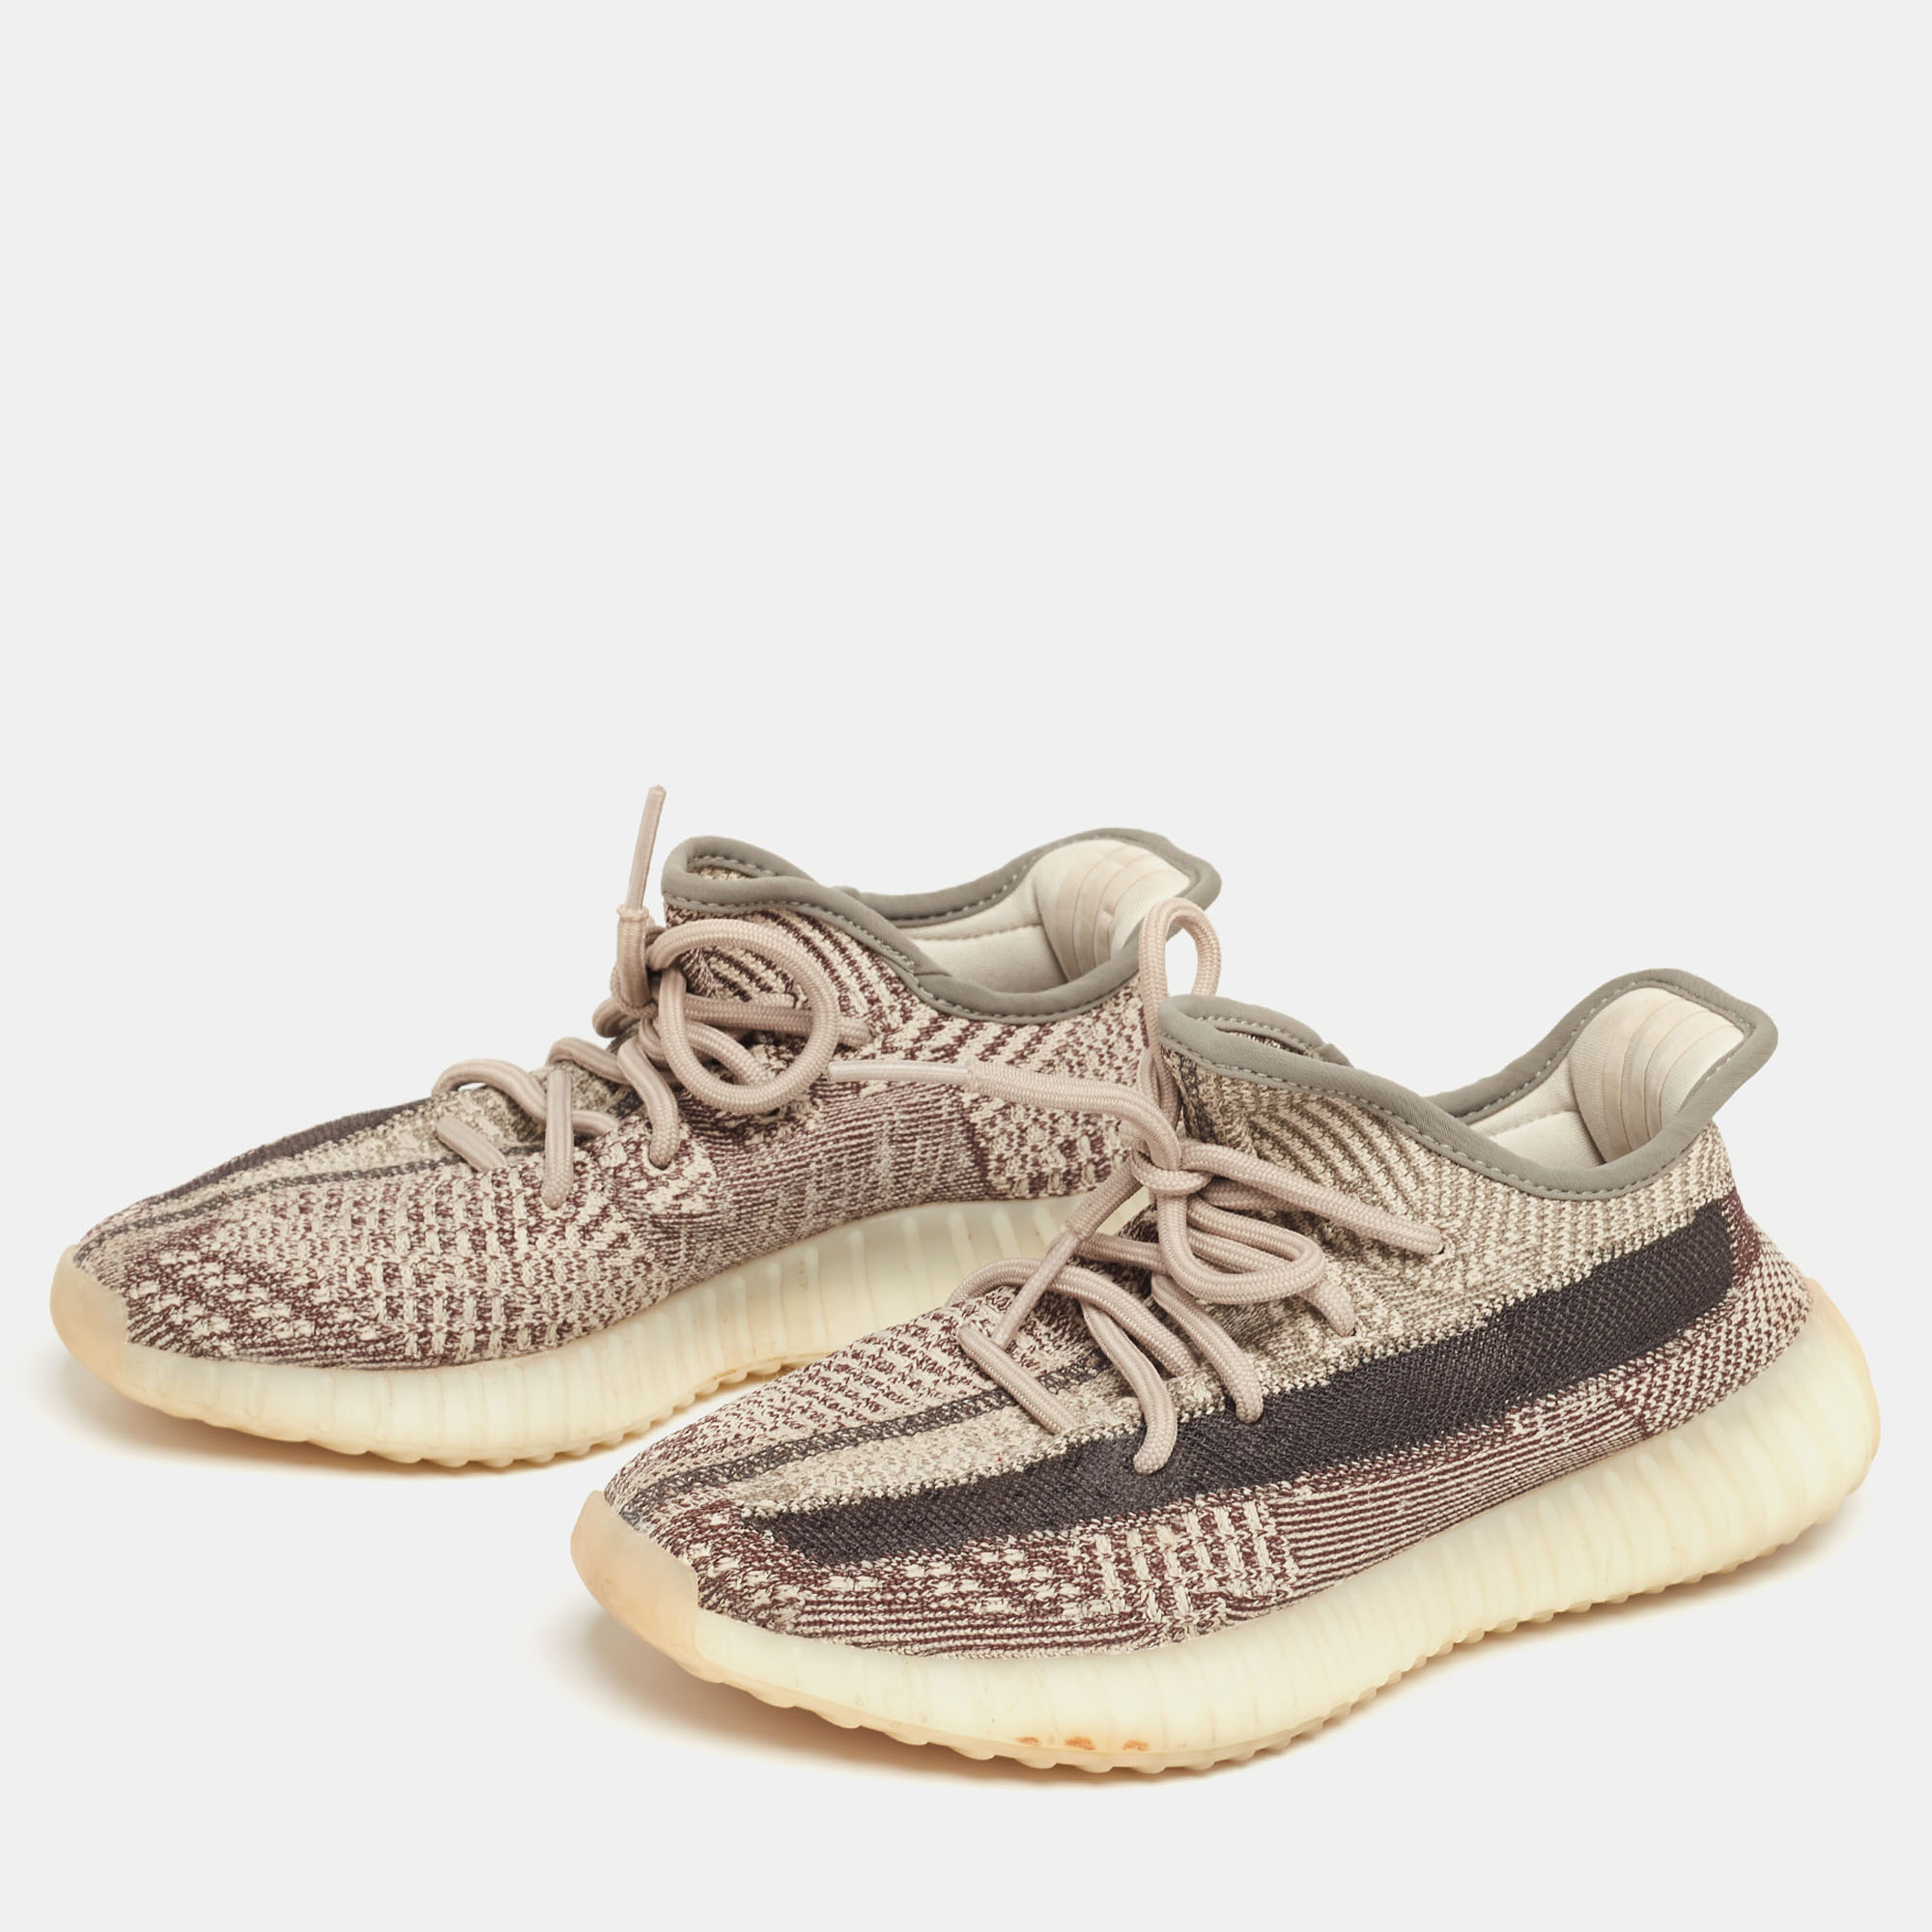 

Adidas x Yeezy Brown/Cream Knit Fabric And Mesh Boost 350 V2 Zyon Sneakers Size 36 2/3